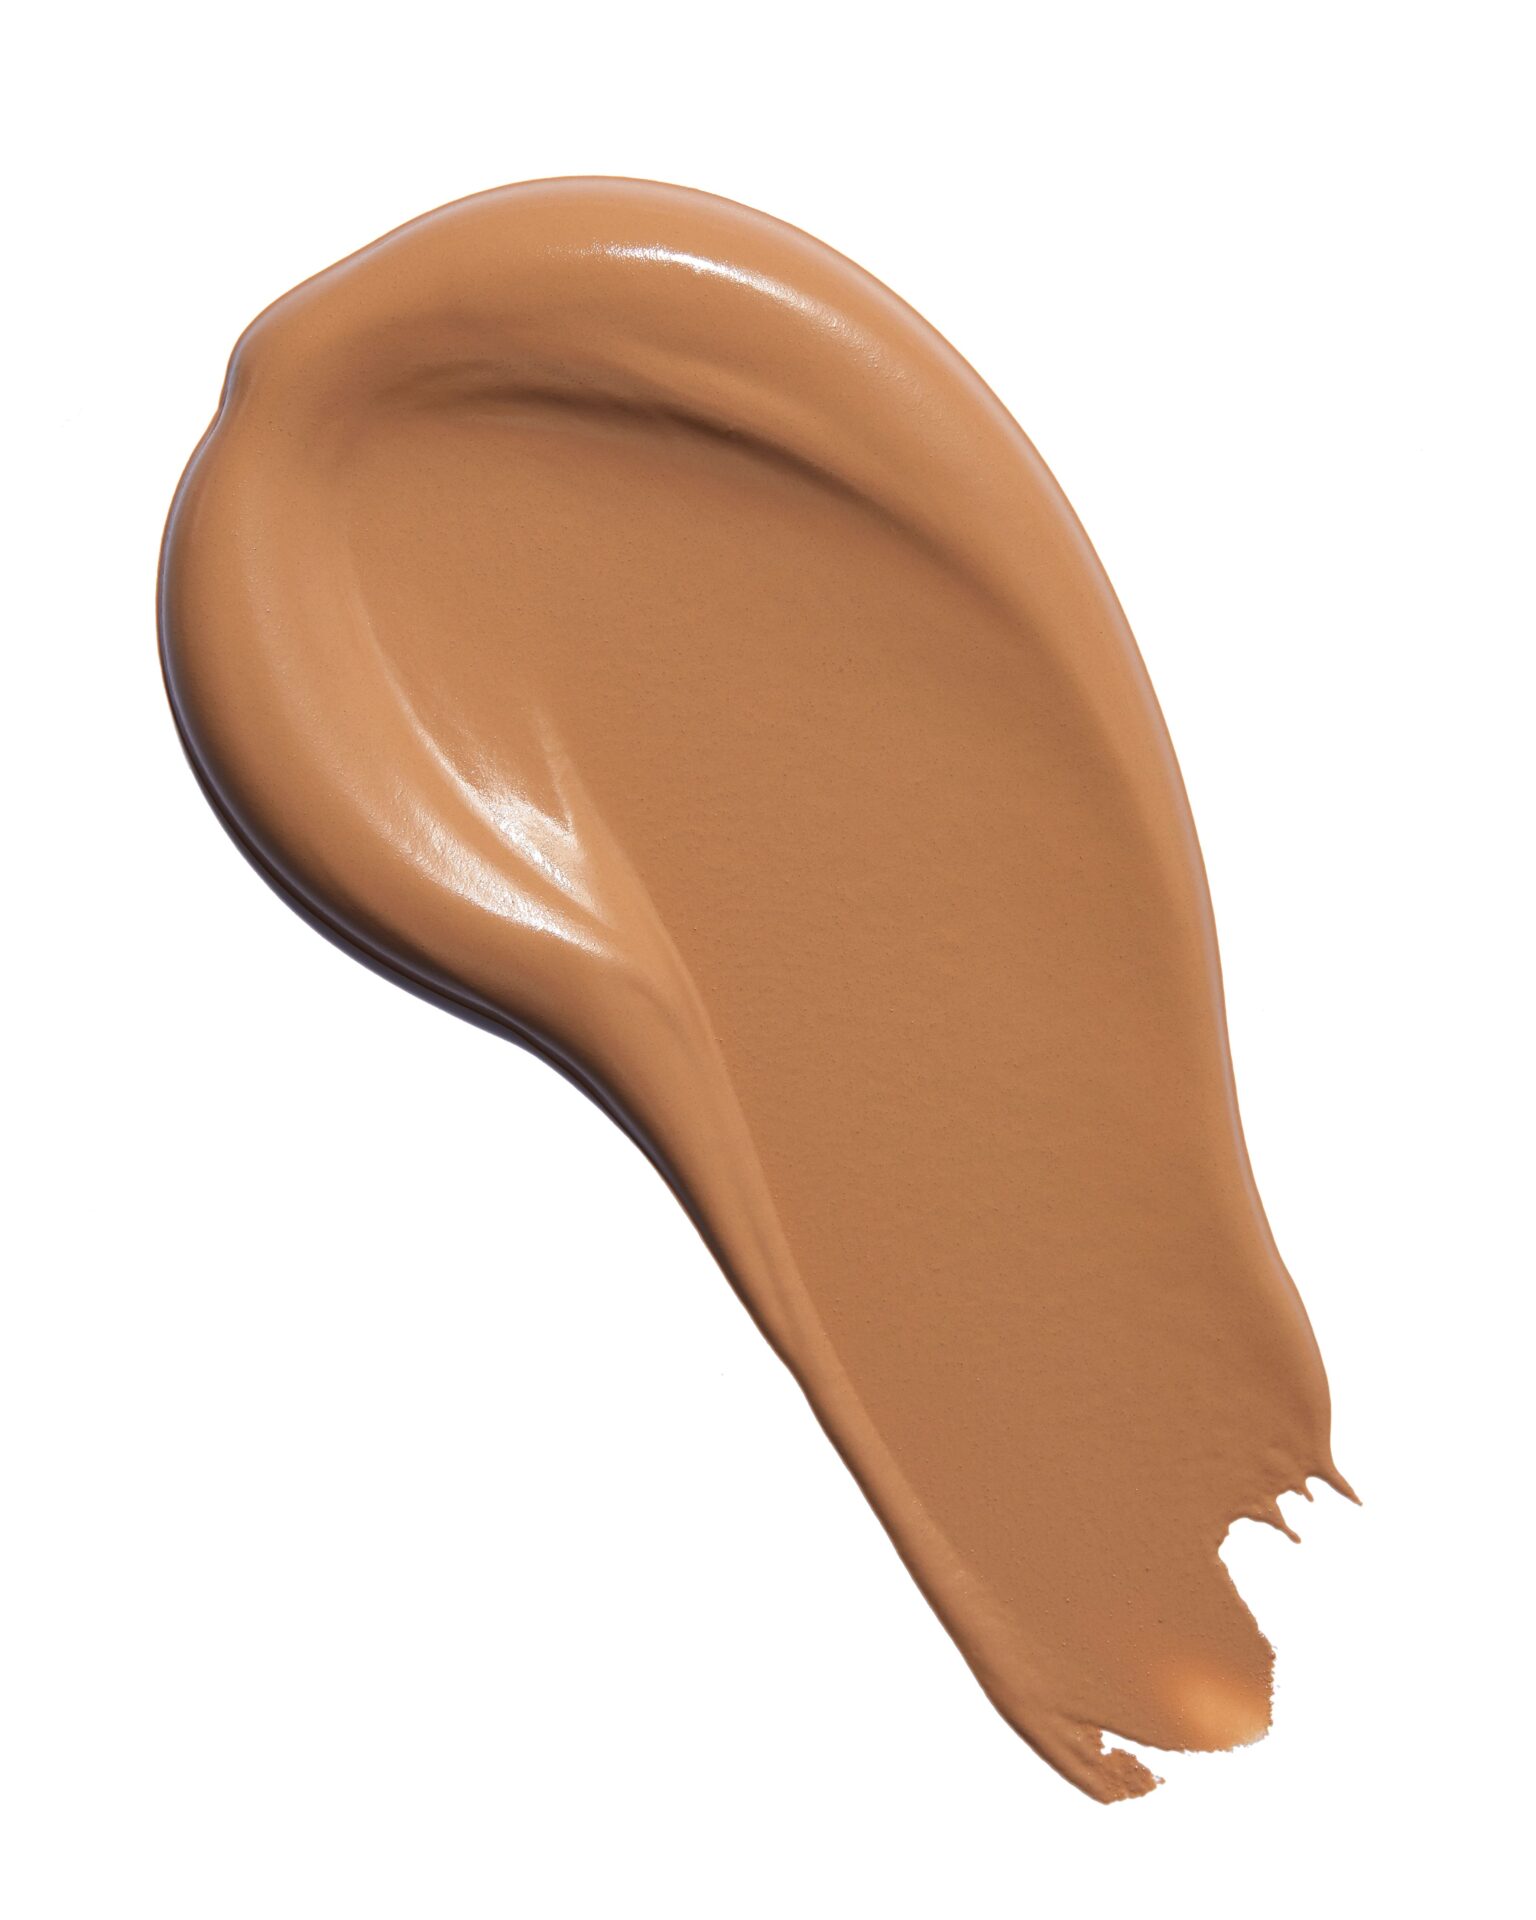 Sculpted By Aimee Connolly Body Base Instant Body Tan Matte Light